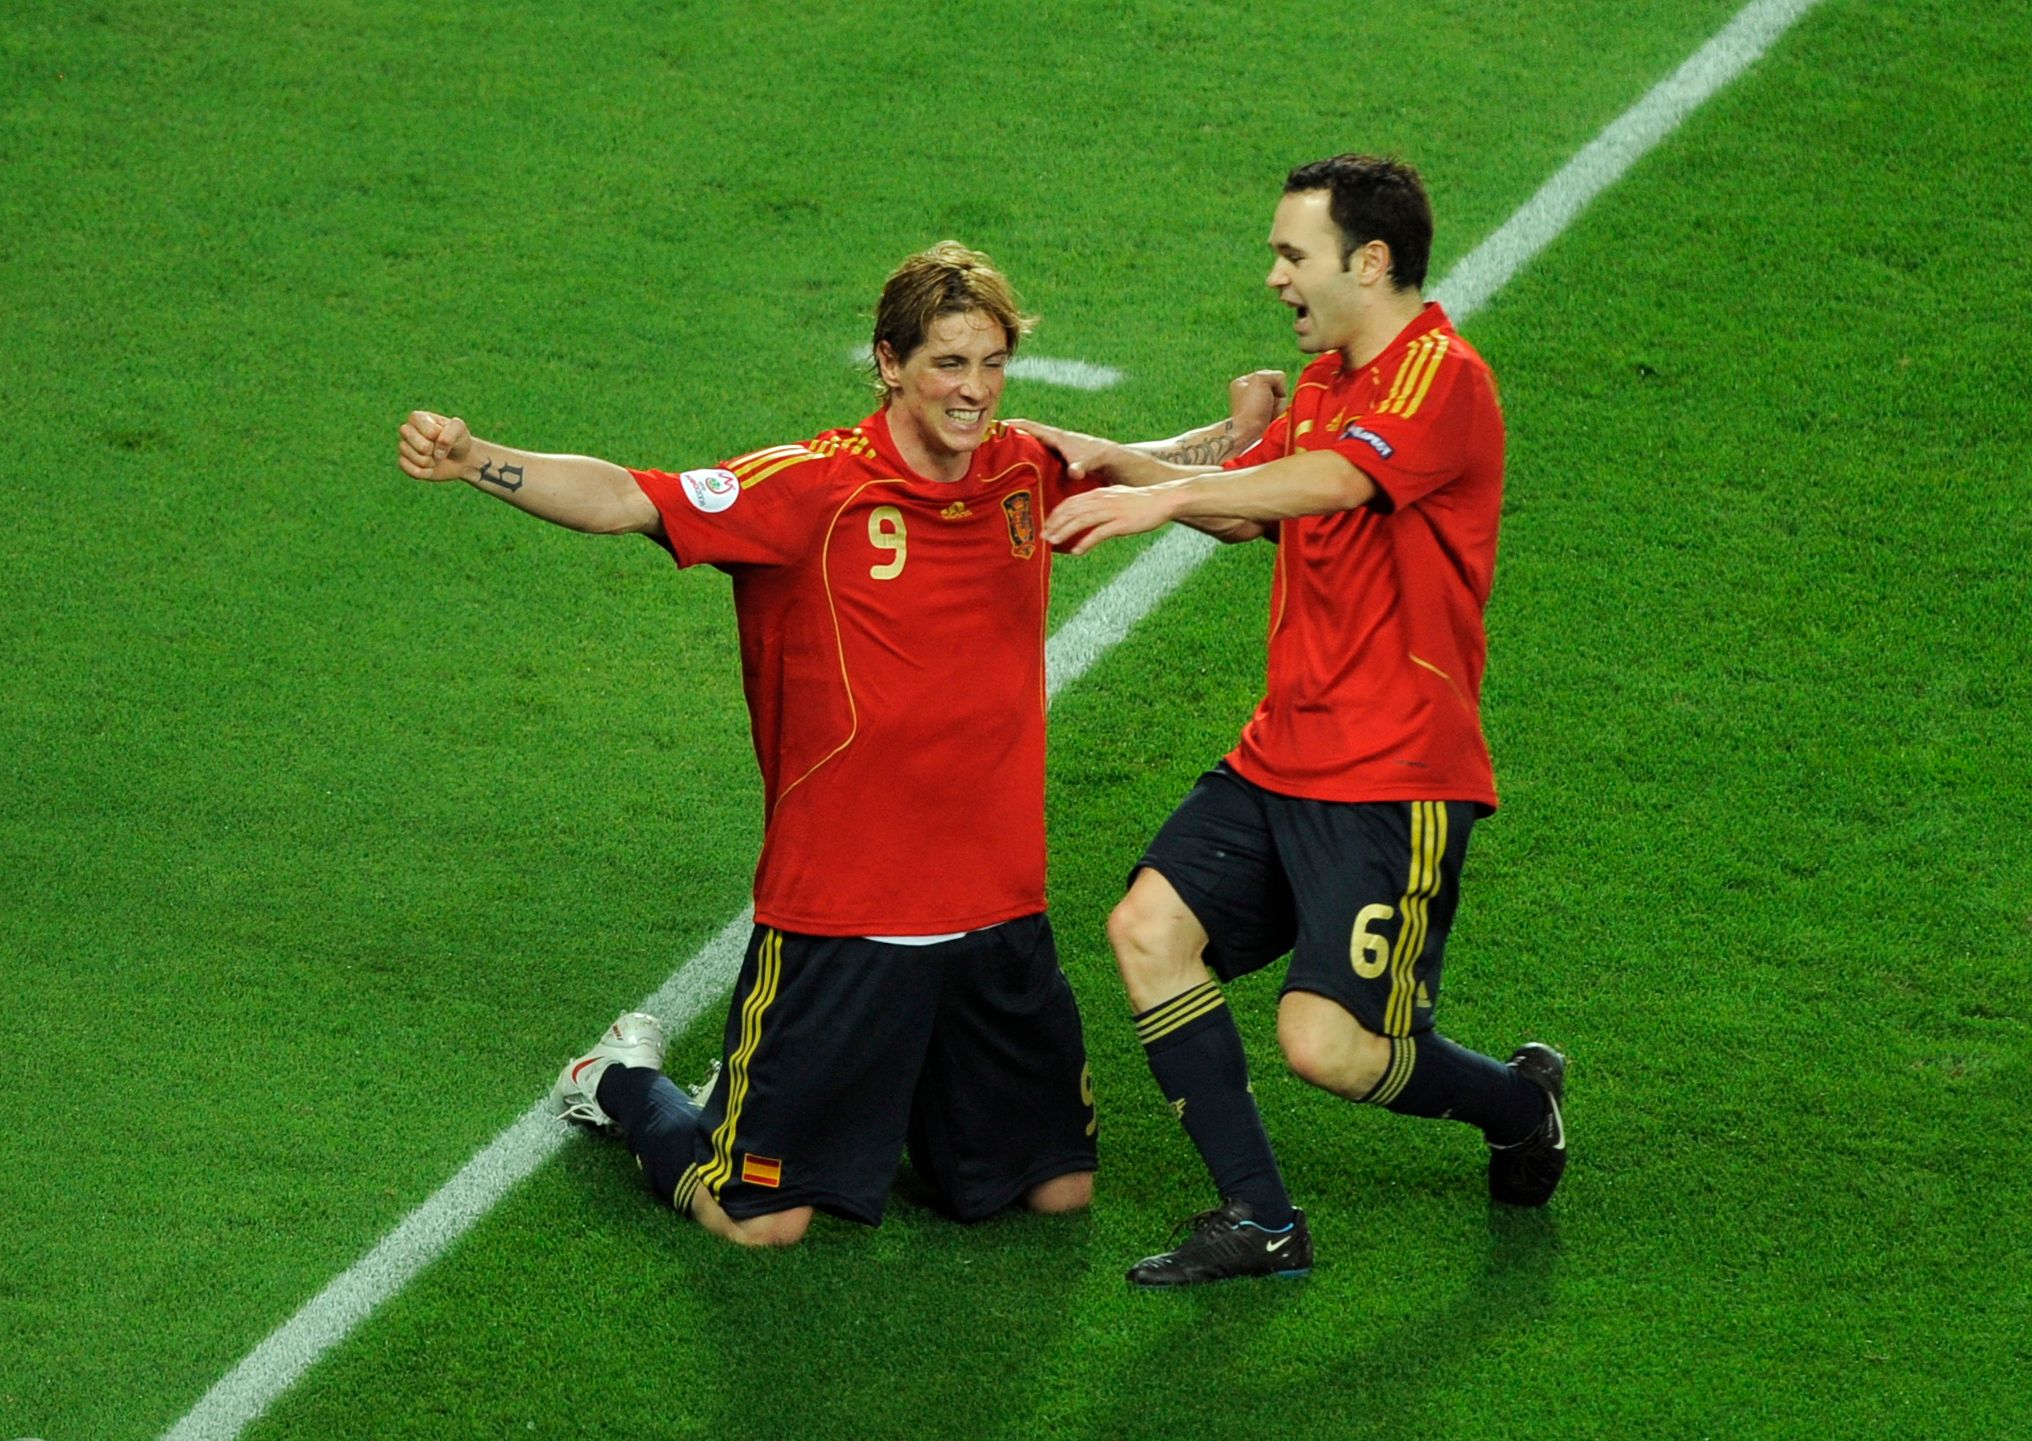 Football - Germany v Spain - UEFA EURO 2008 Final  - Ernst Happel Stadium, Vienna, Austria - 29/6/08 
Spain's Fernando Torres (L) celebrates with Andres Iniesta after scoring his teams first goal 
Mandatory Credit: Action Images / Tony O'Brien